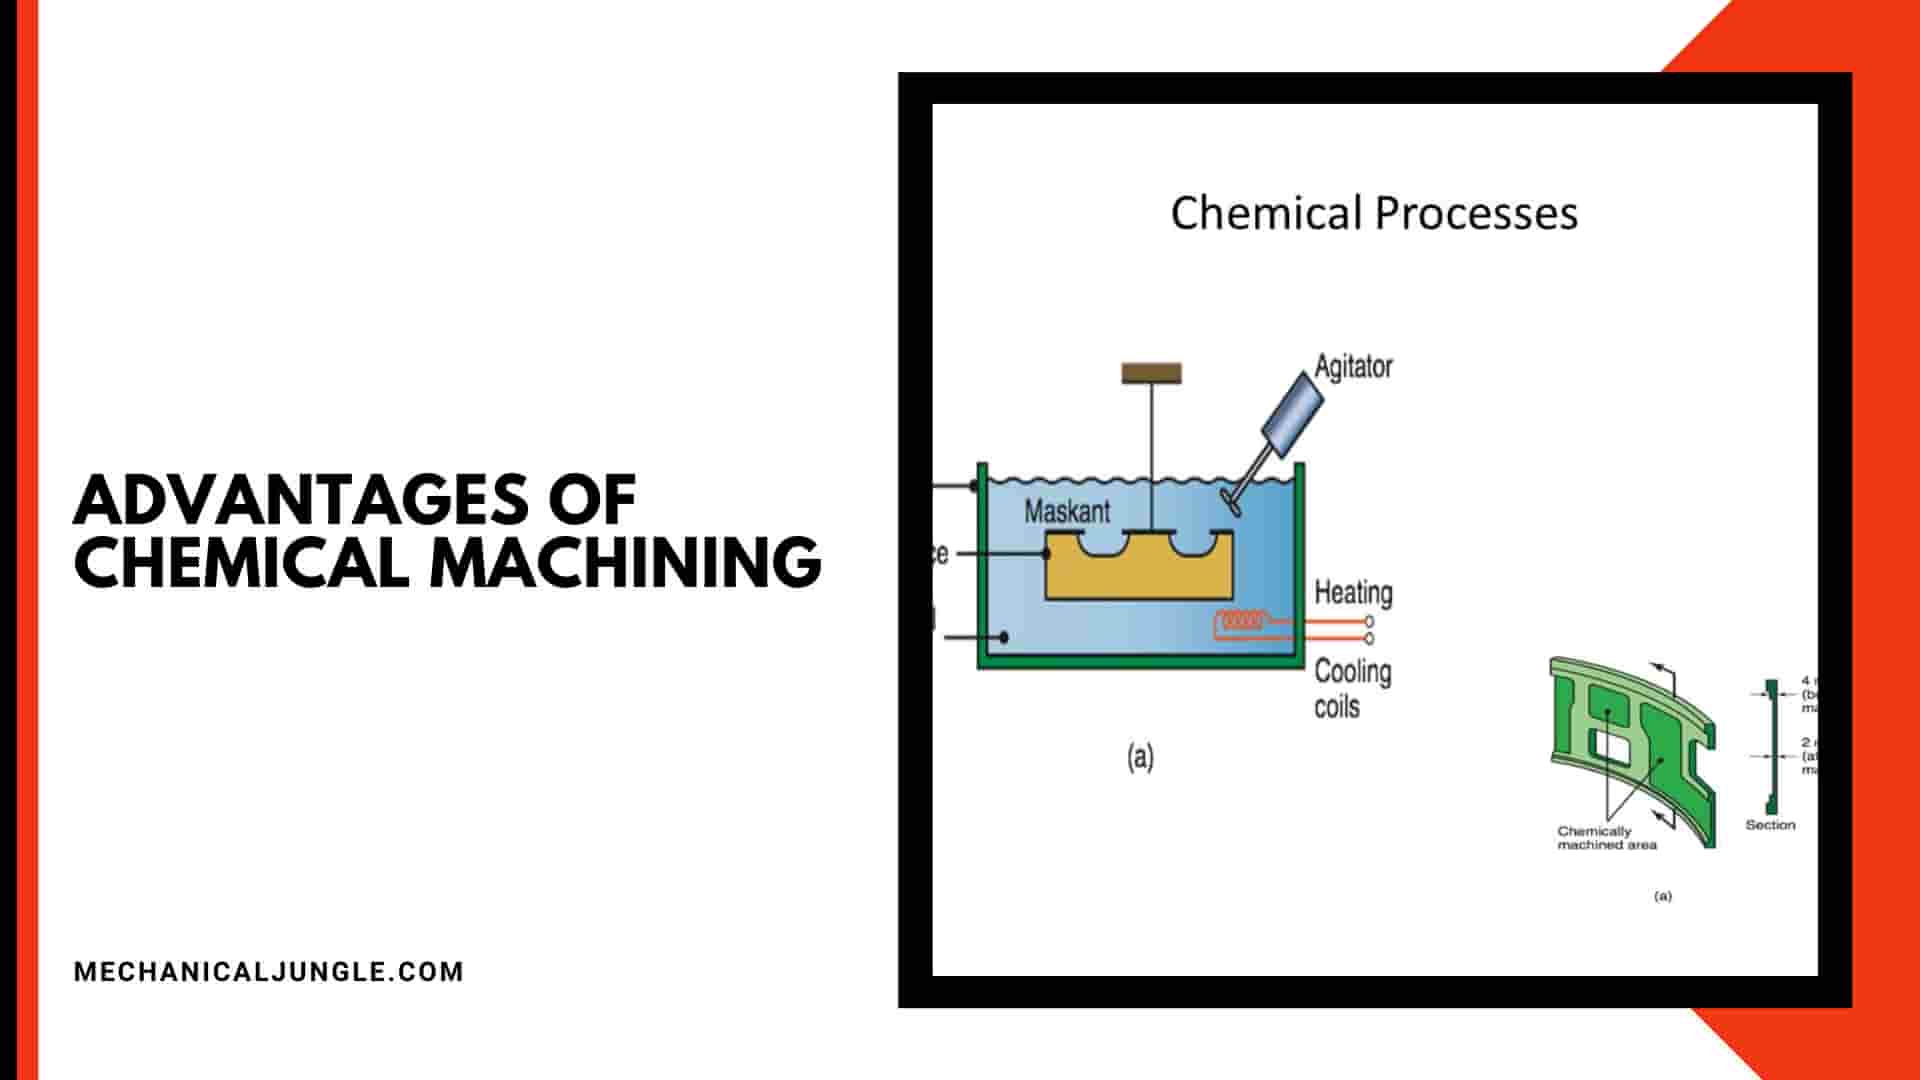 Advantages of Chemical Machining